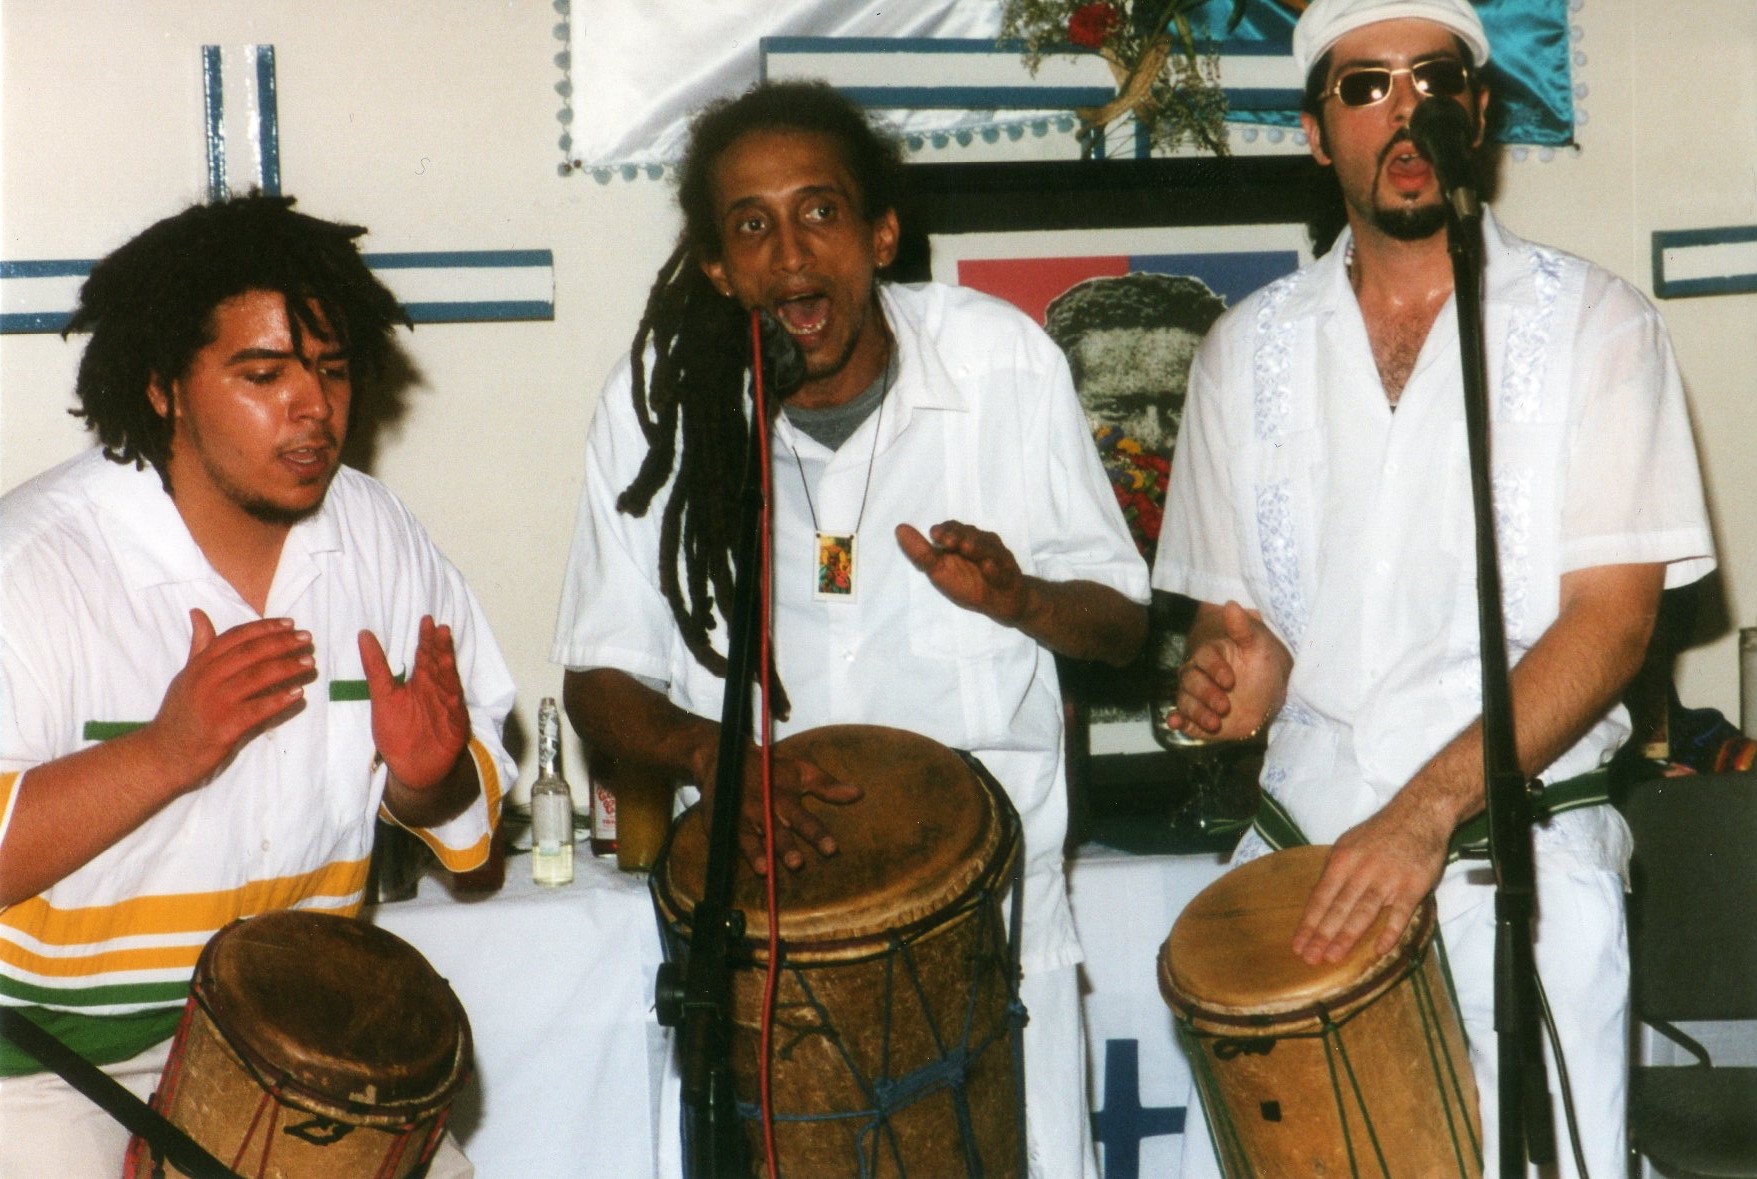 Kwesi Ernesto Rodríguez (center) of La 21 División playing at First Messianic Festival in Honor of Olivorio Mateo, June 29, 2003